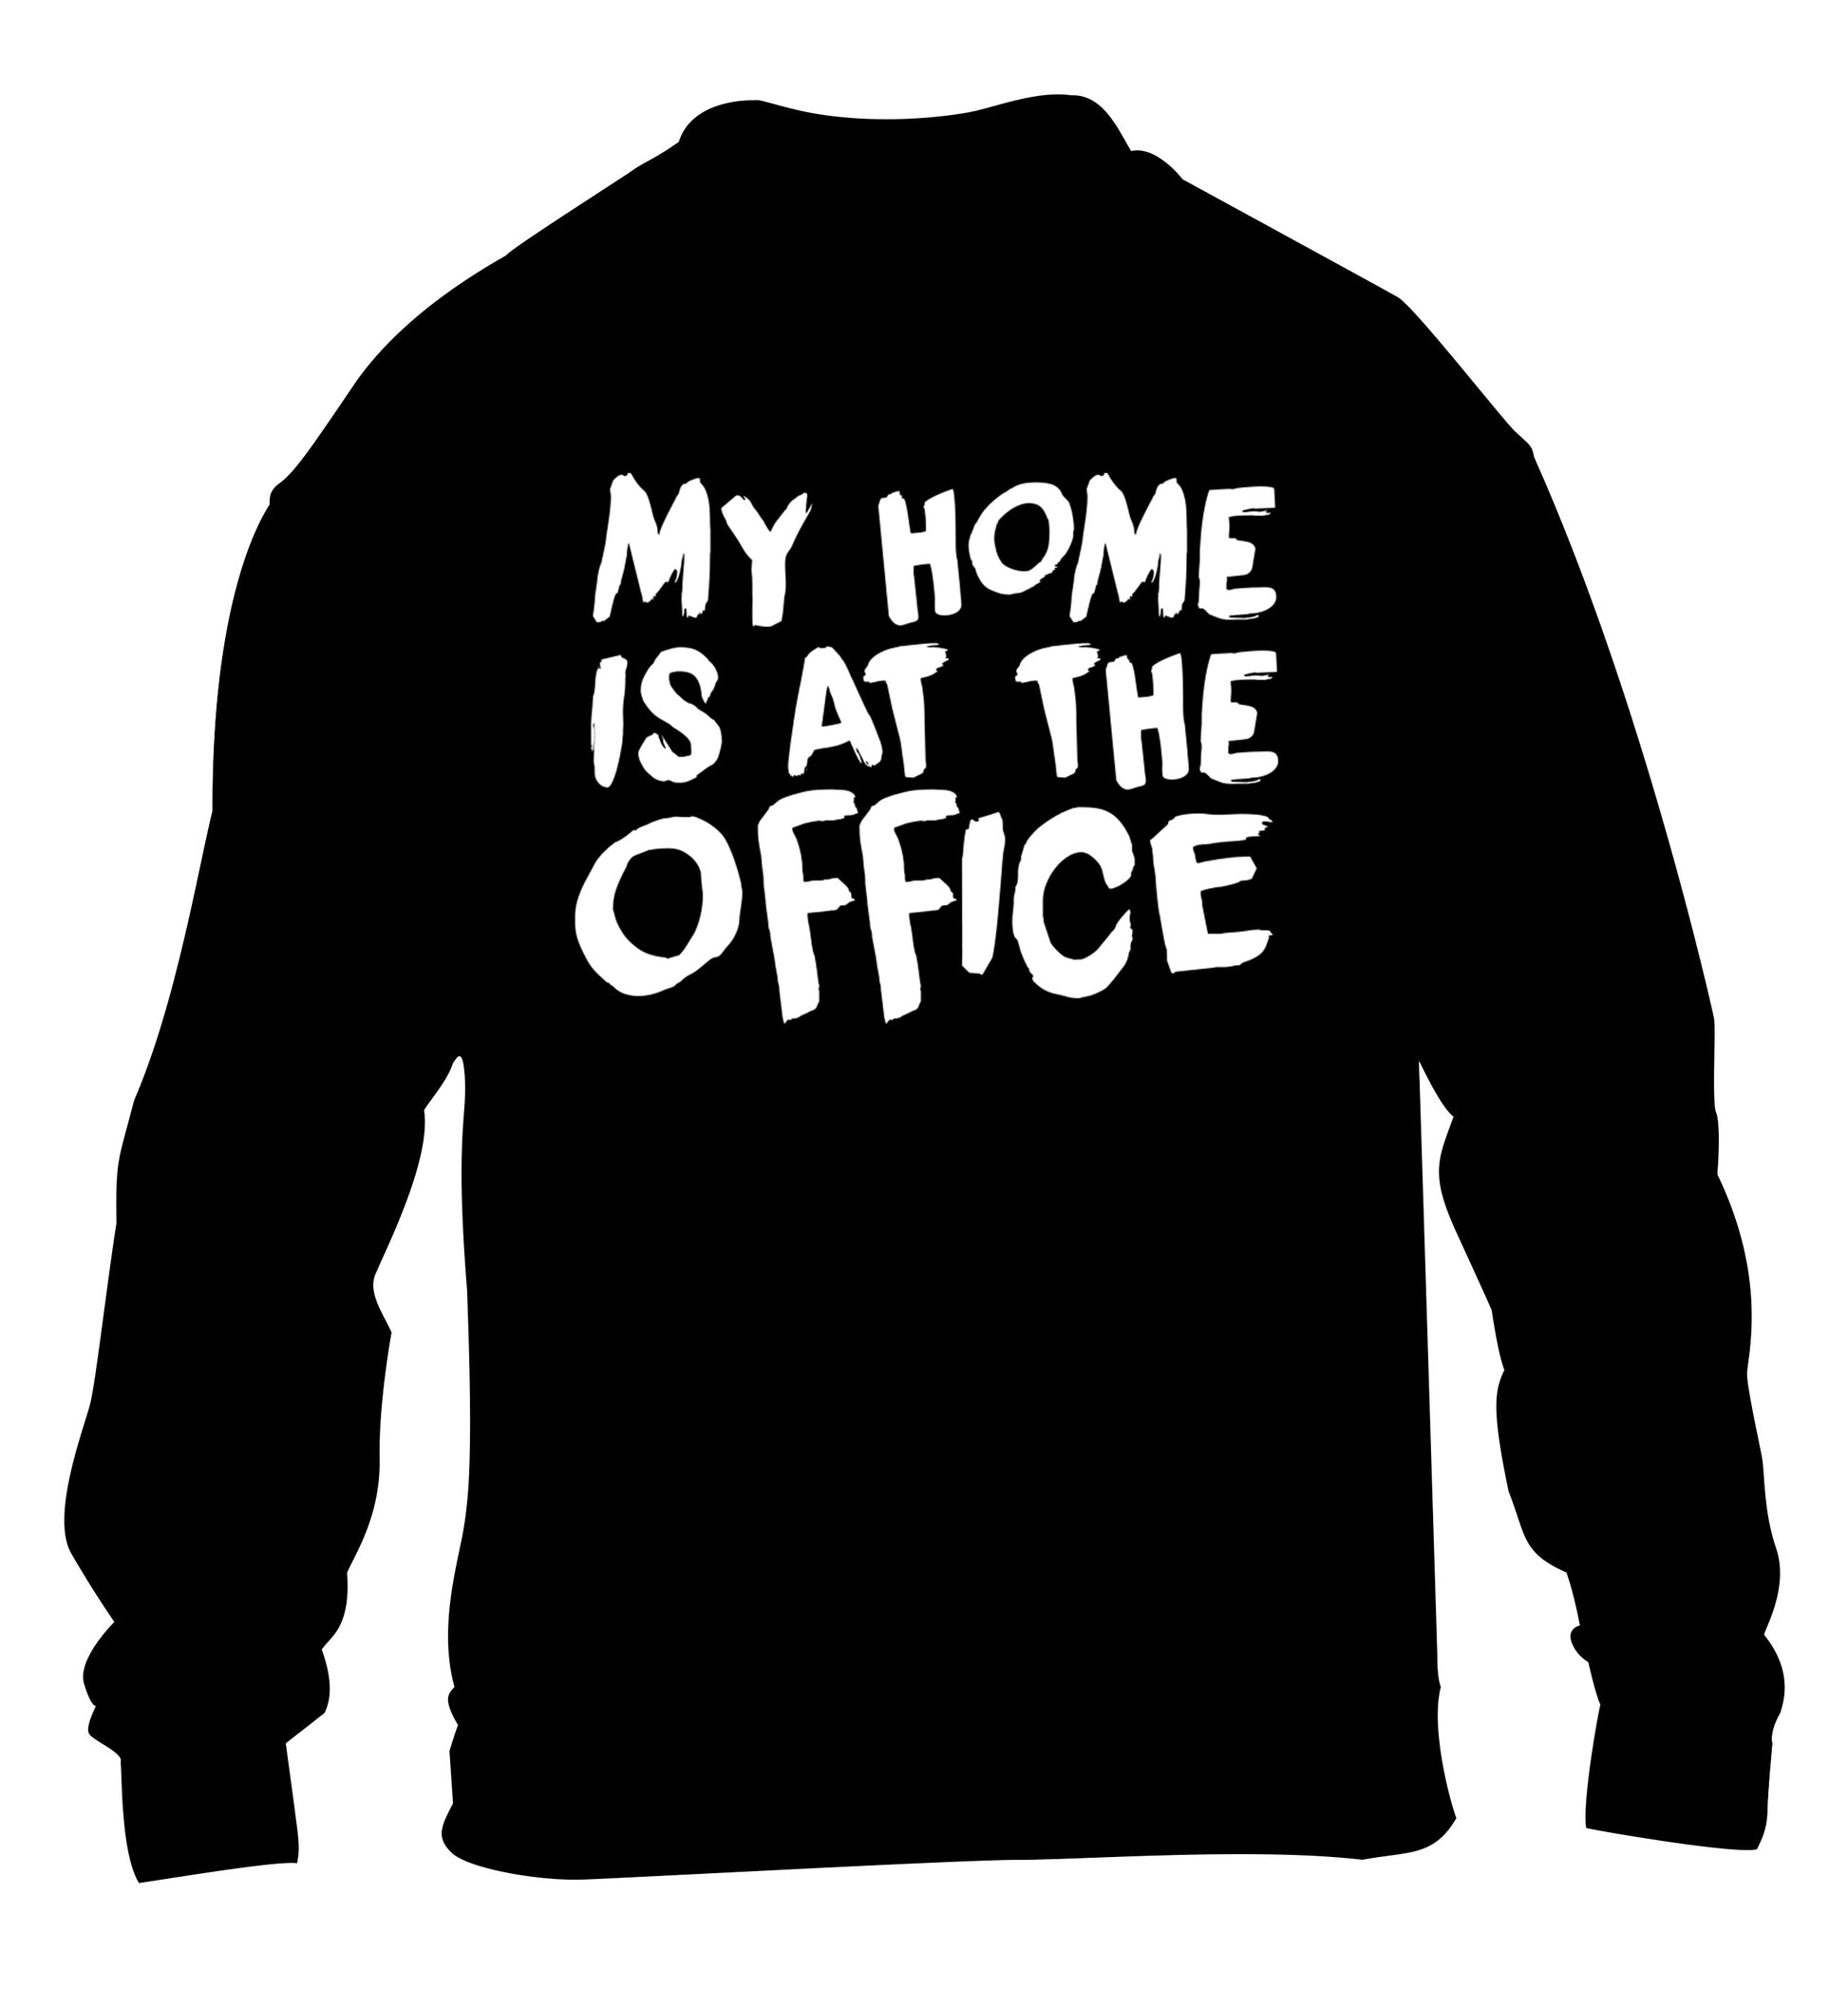 My home is at the office children's black sweater 12-14 Years